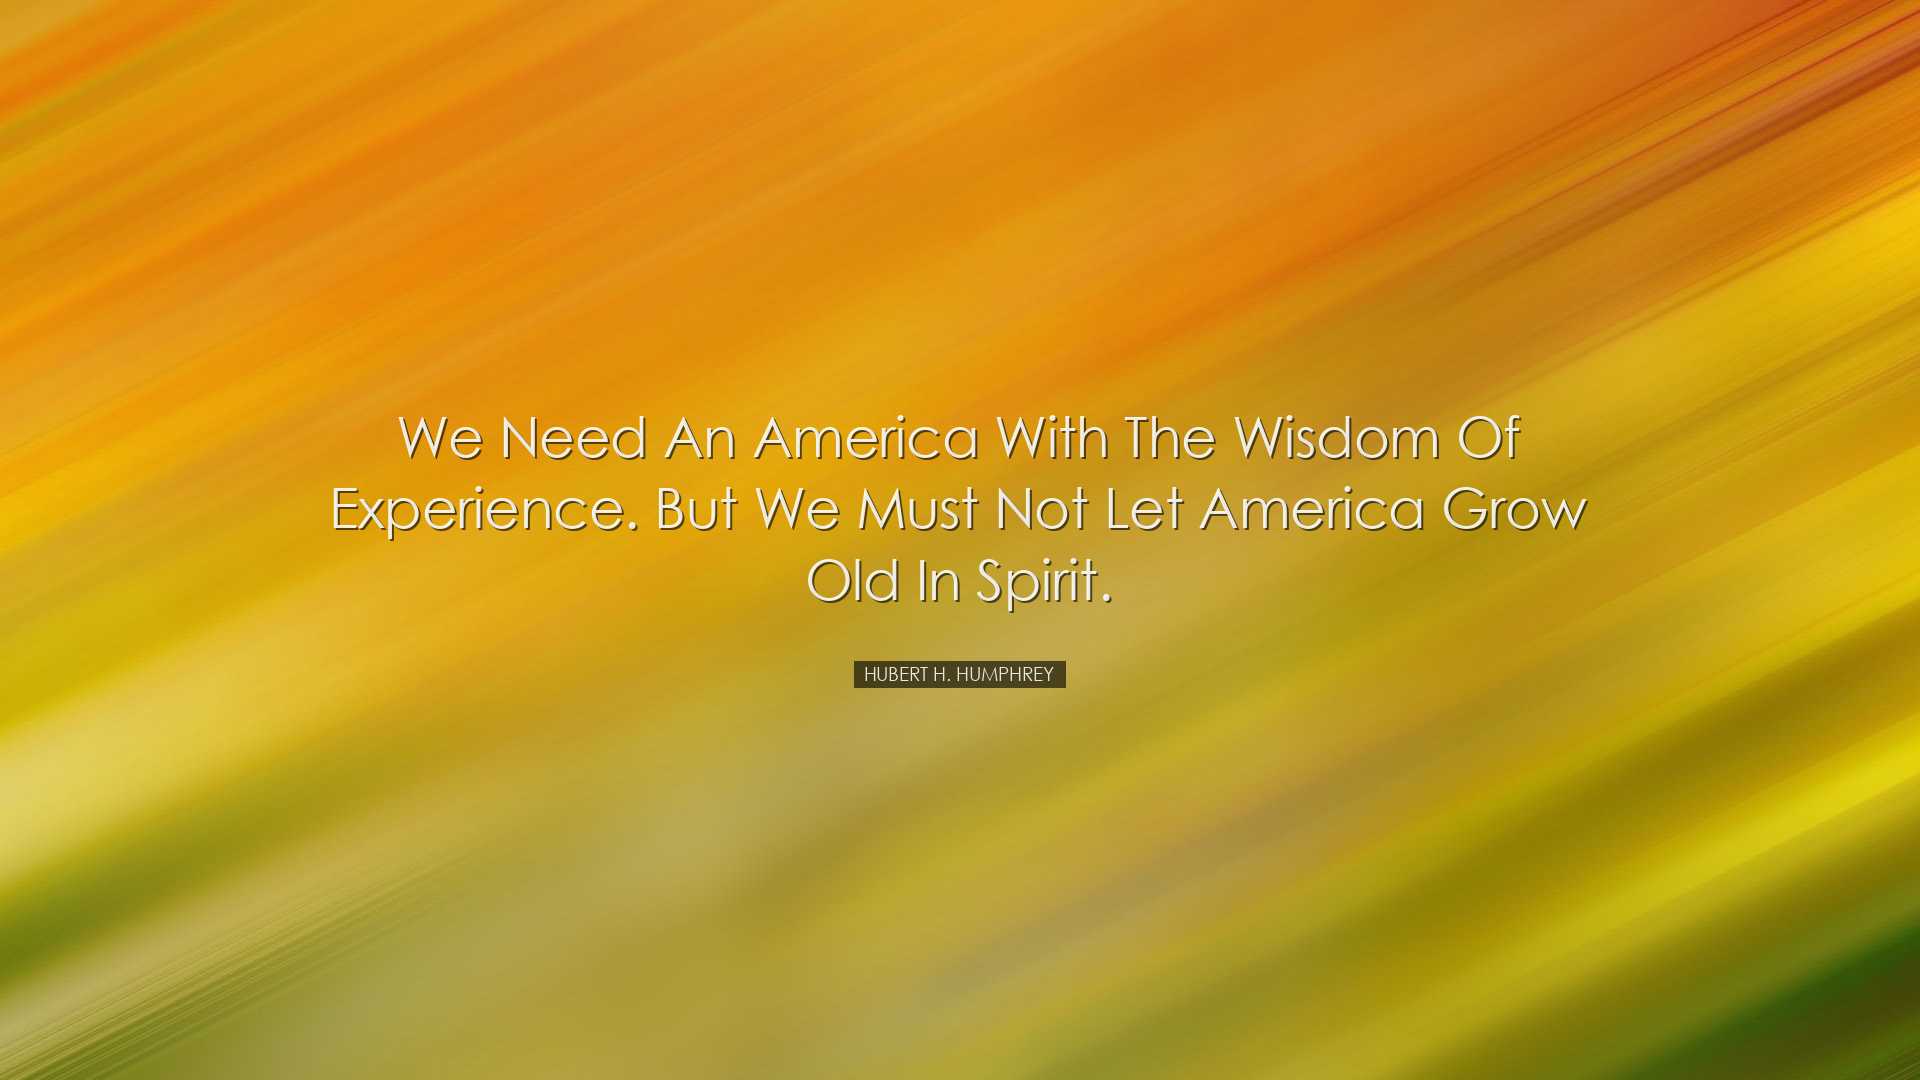 We need an America with the wisdom of experience. But we must not